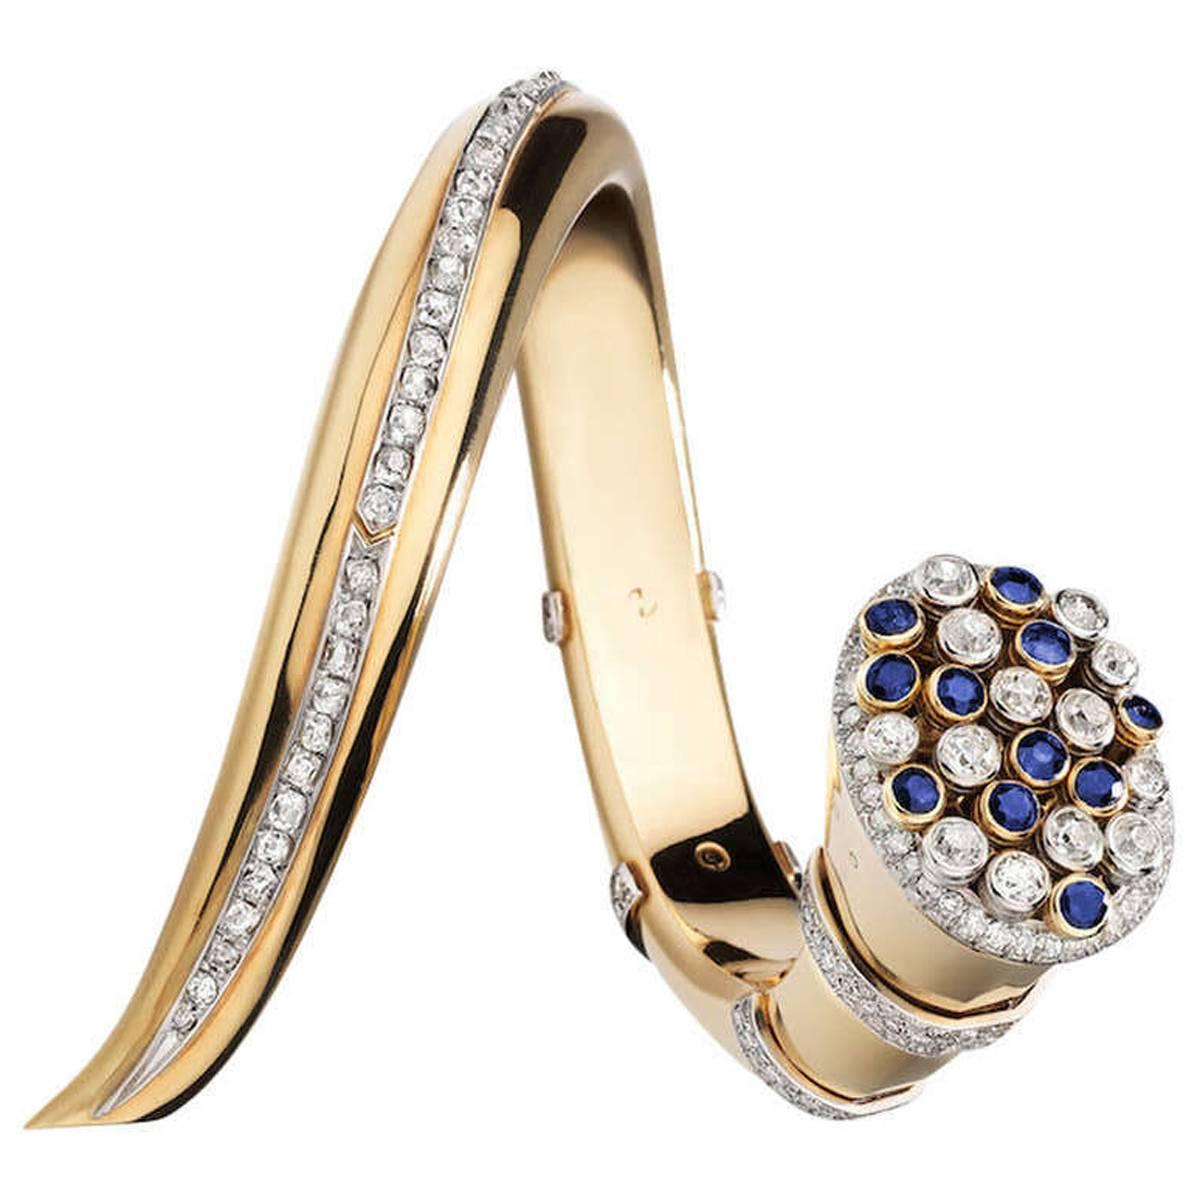 Unique and Monumental! The cluster of oval and circular-cut sapphires and diamonds is set en tremblant within the open terminal, framed by circular-cut stones, the bangle embellished with a row and bands of cushion-shaped, circular- and single-cut